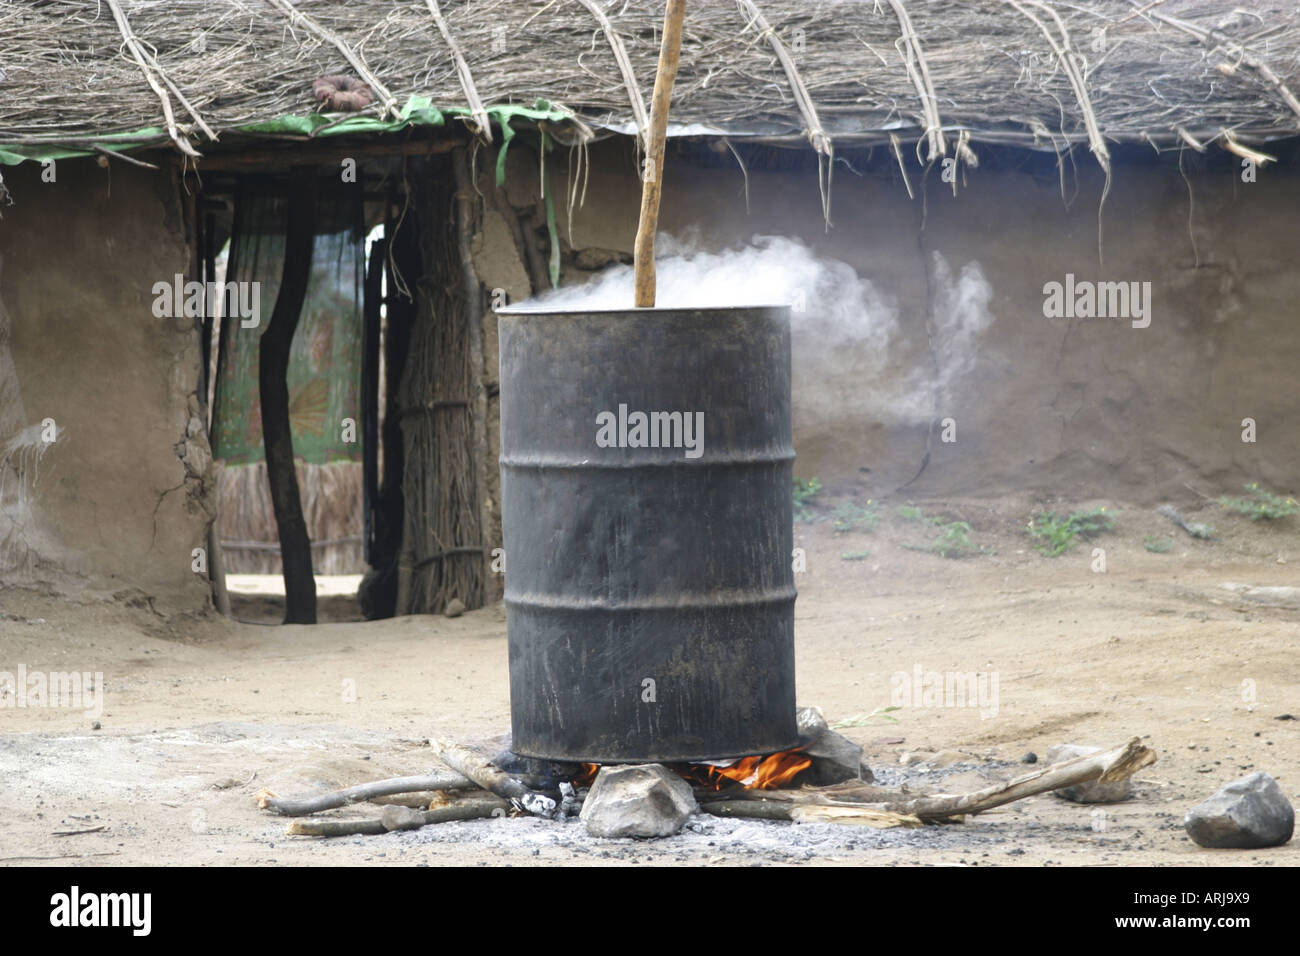 food is cooking in a barrel, Sudan Stock Photo